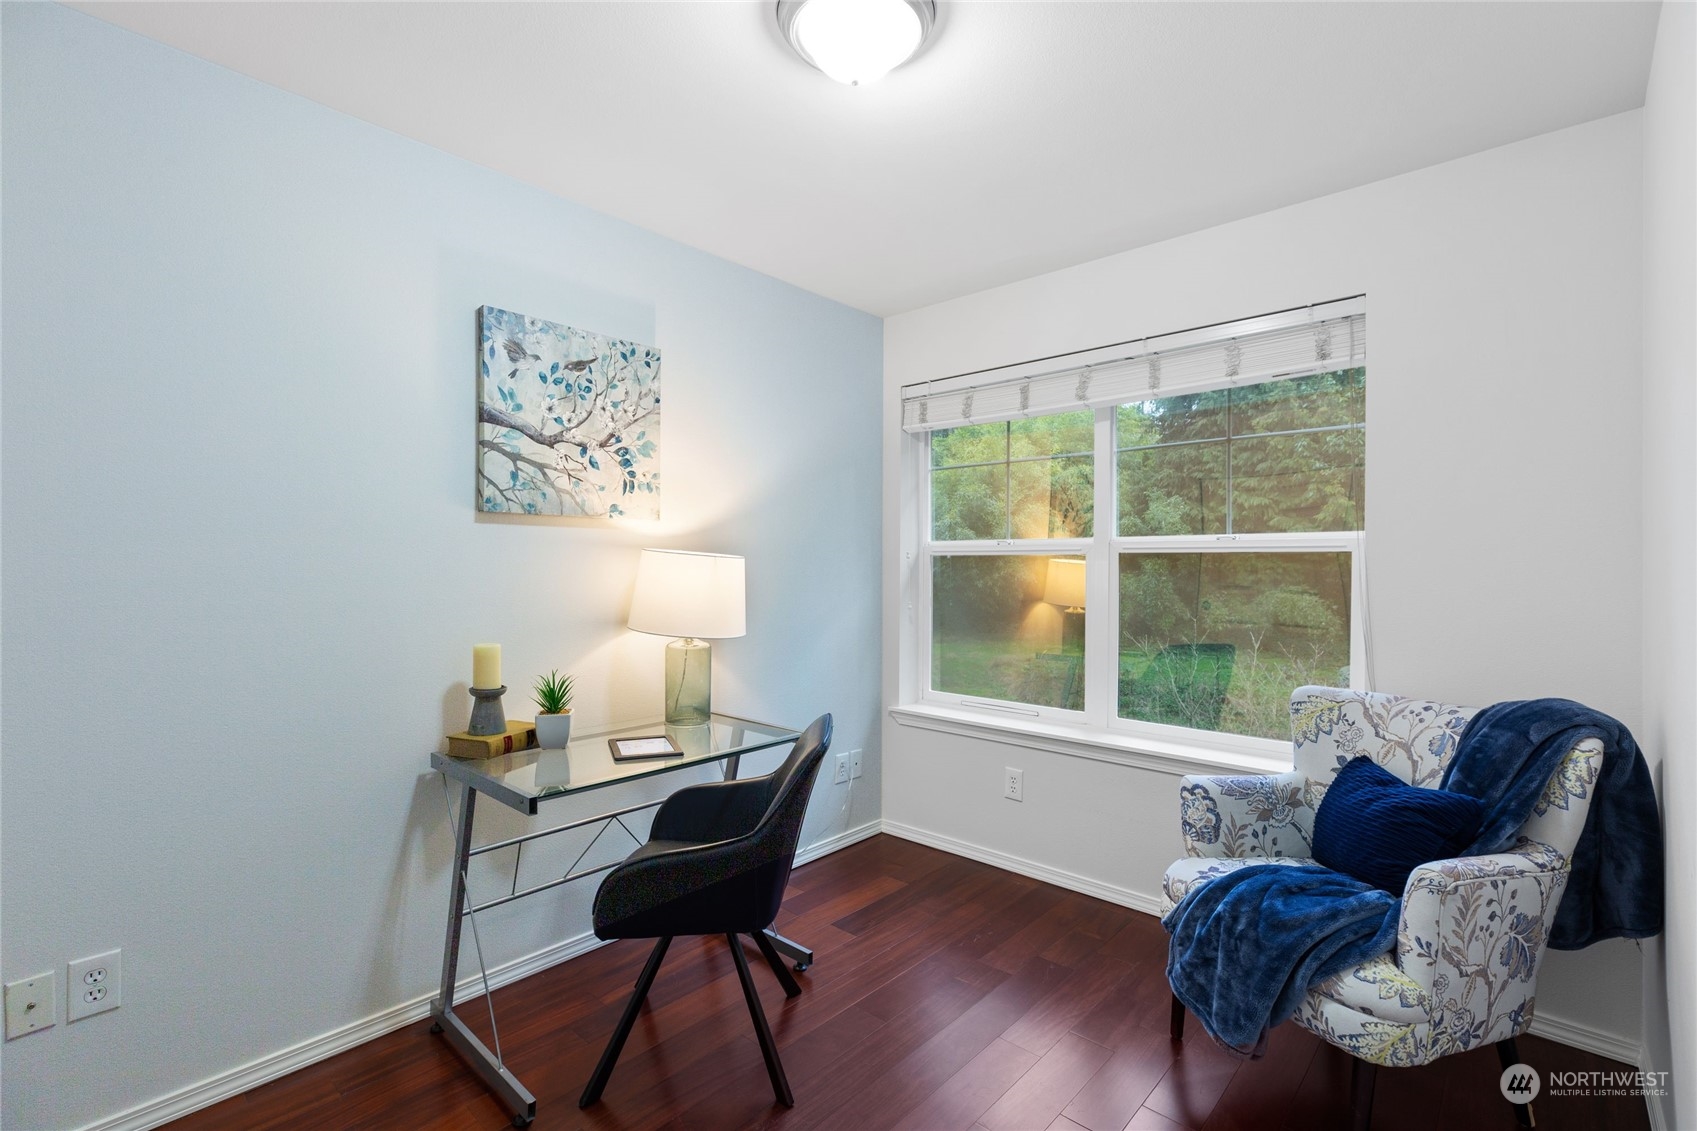 1766 N Northgate Way Unit G, Seattle, Washington, 98133, United States, 2 Bedrooms Bedrooms, ,2 BathroomsBathrooms,Residential,For Sale,1766 N Northgate Way Unit G,1486871